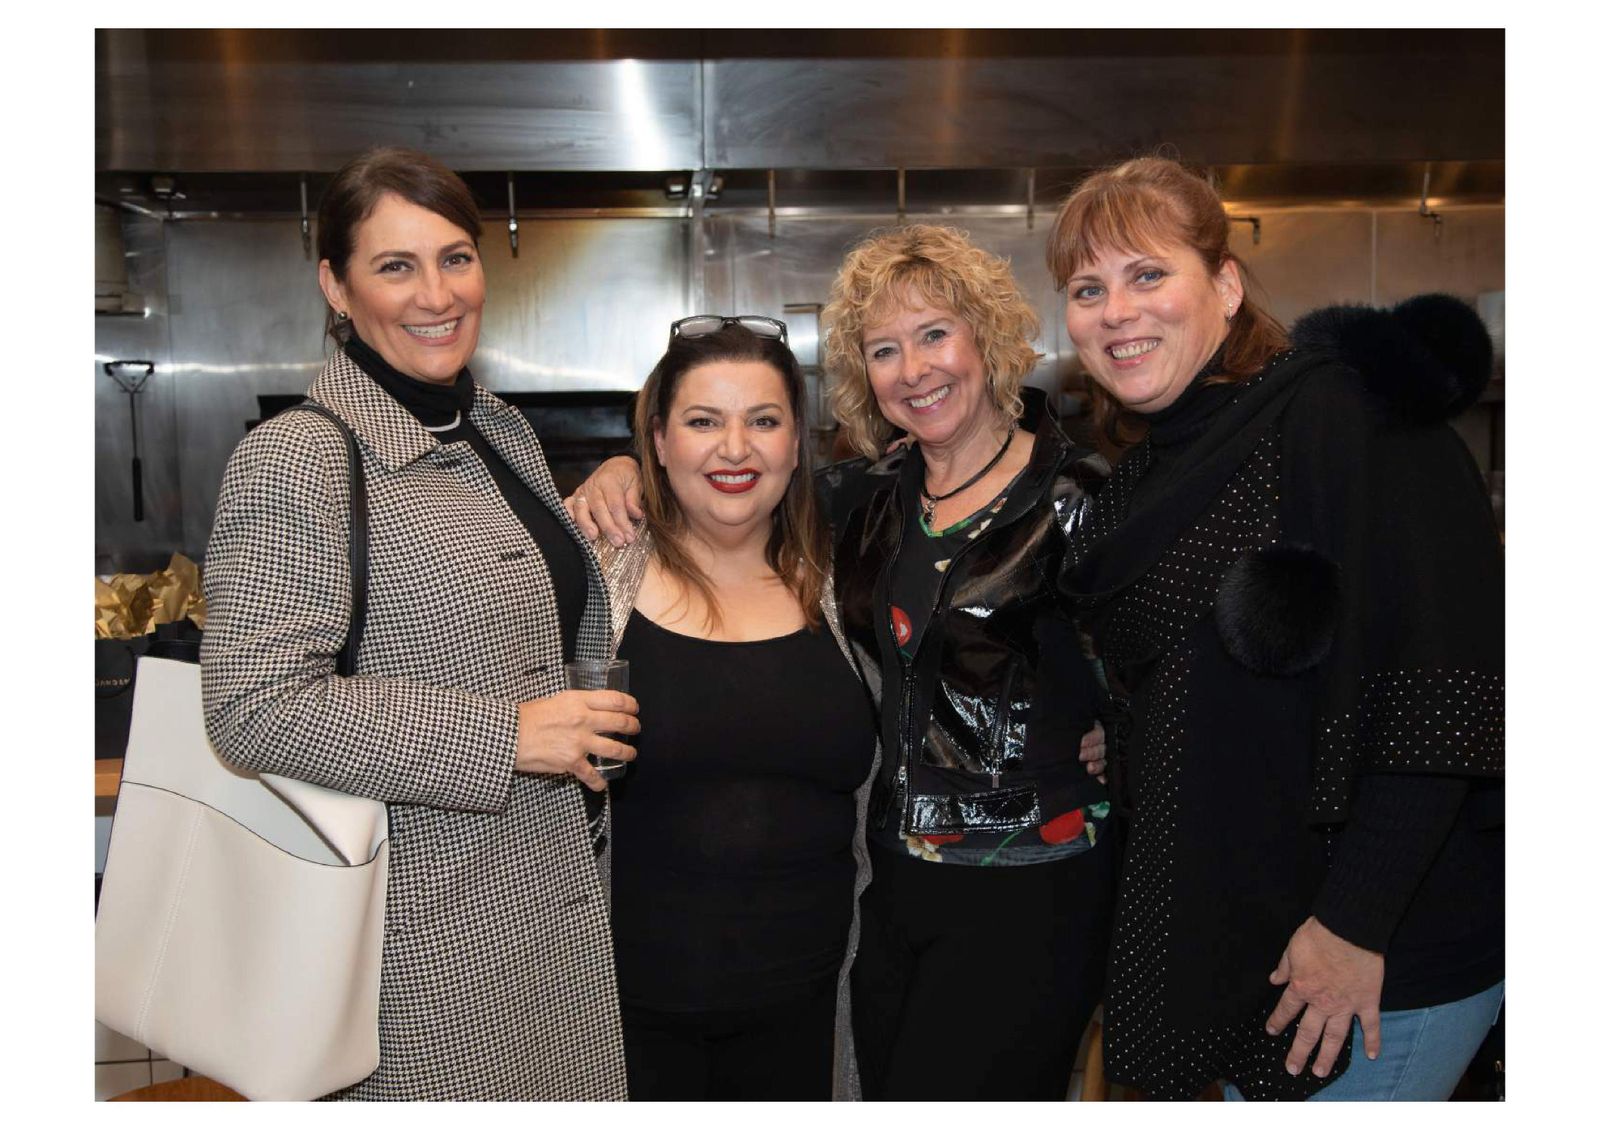 Celebrating Connections: A Look Back at Our Mix and Mingle Holiday Event